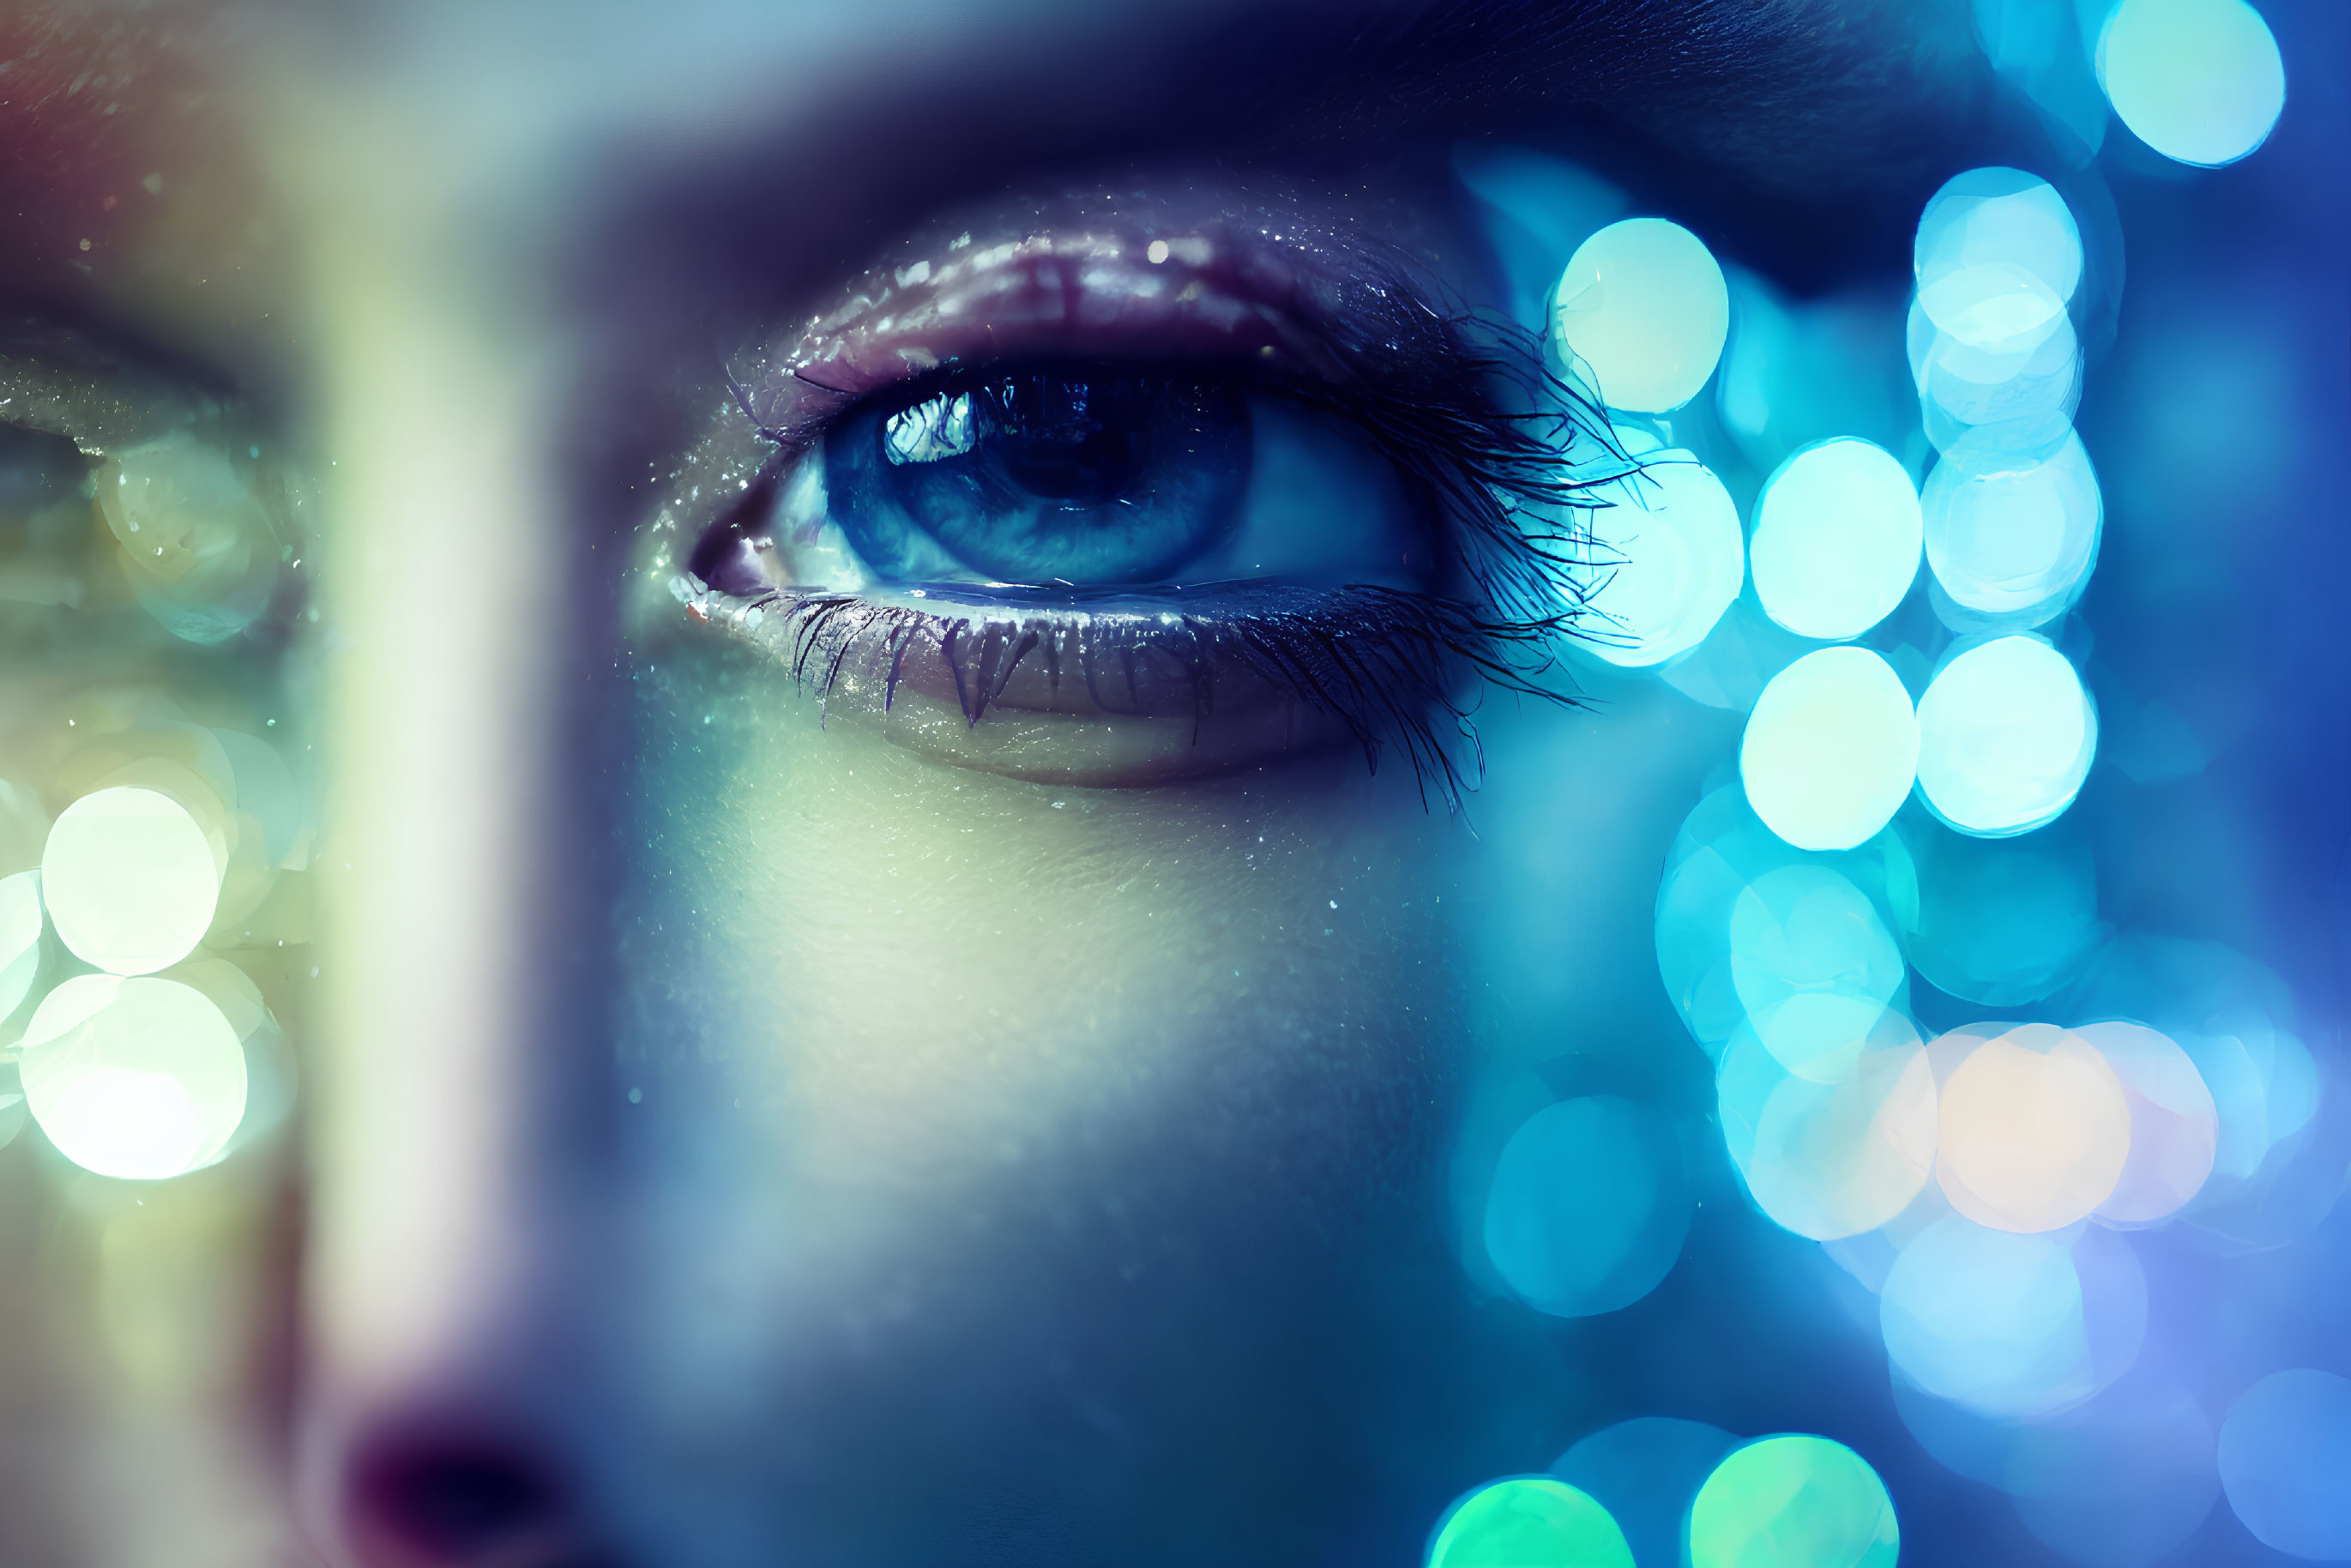 Detailed Close-Up of Tearful Eye with Blue Tones and Bokeh Light Effects